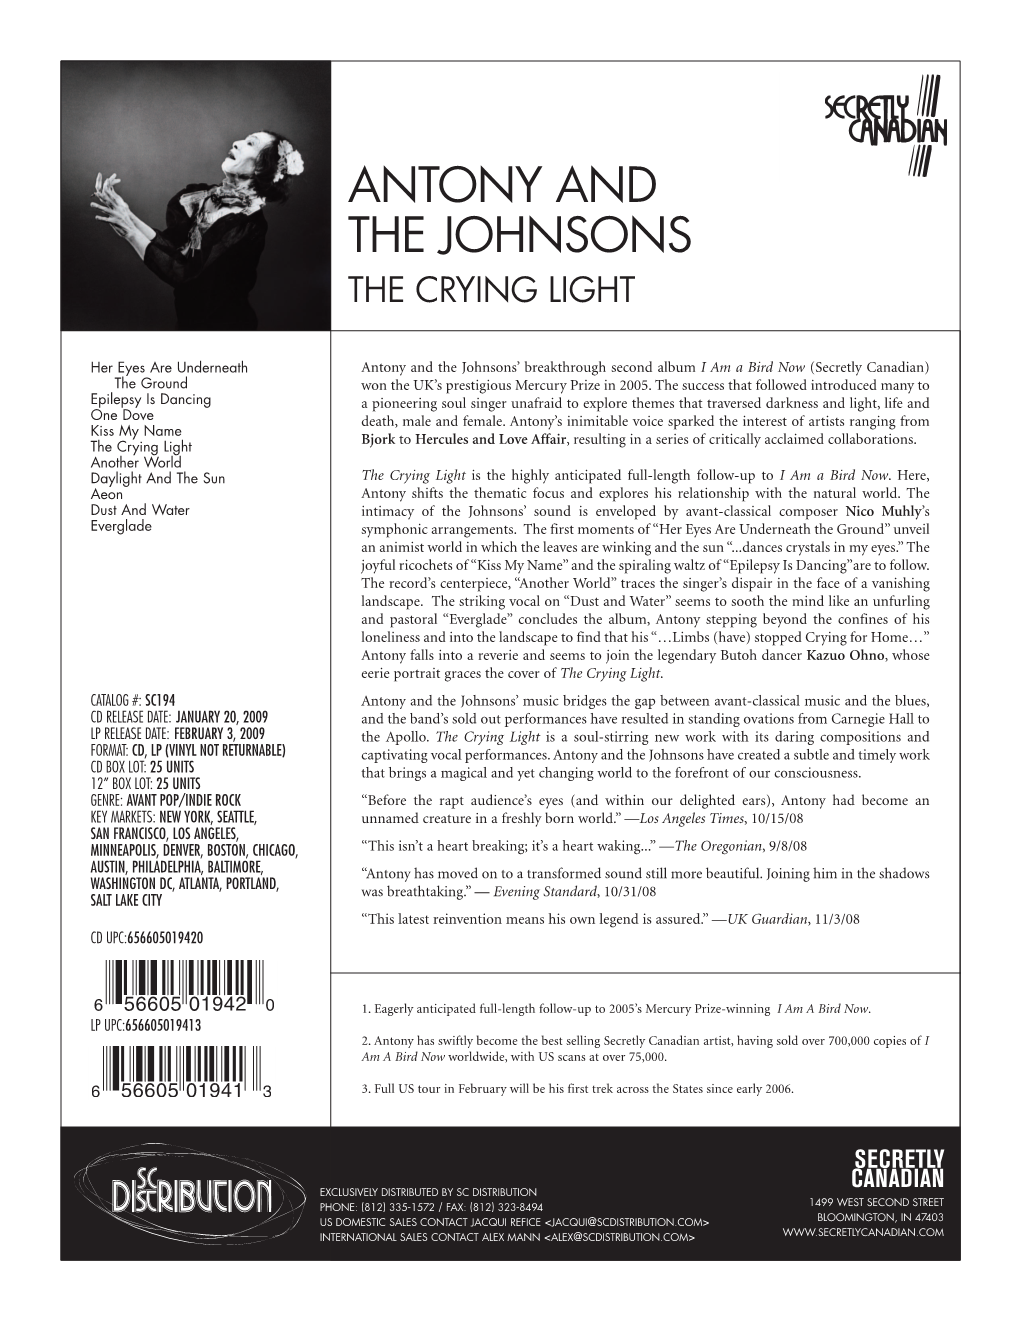 Antony and the Johnsons the Crying Light